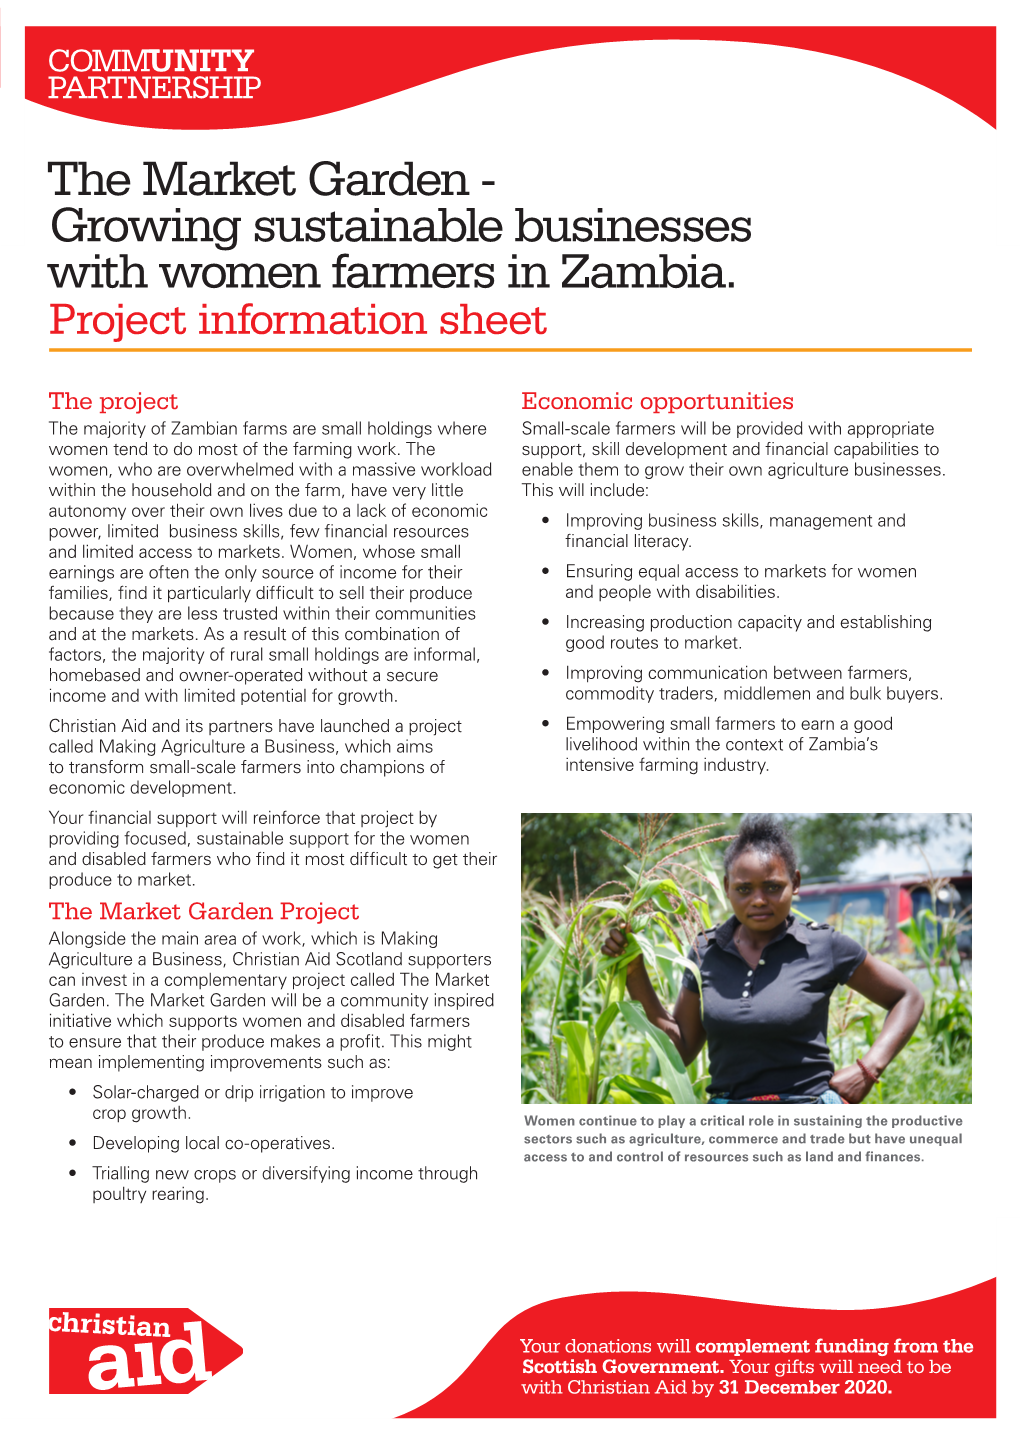 The Market Garden - Growing Sustainable Businesses with Women Farmers in Zambia